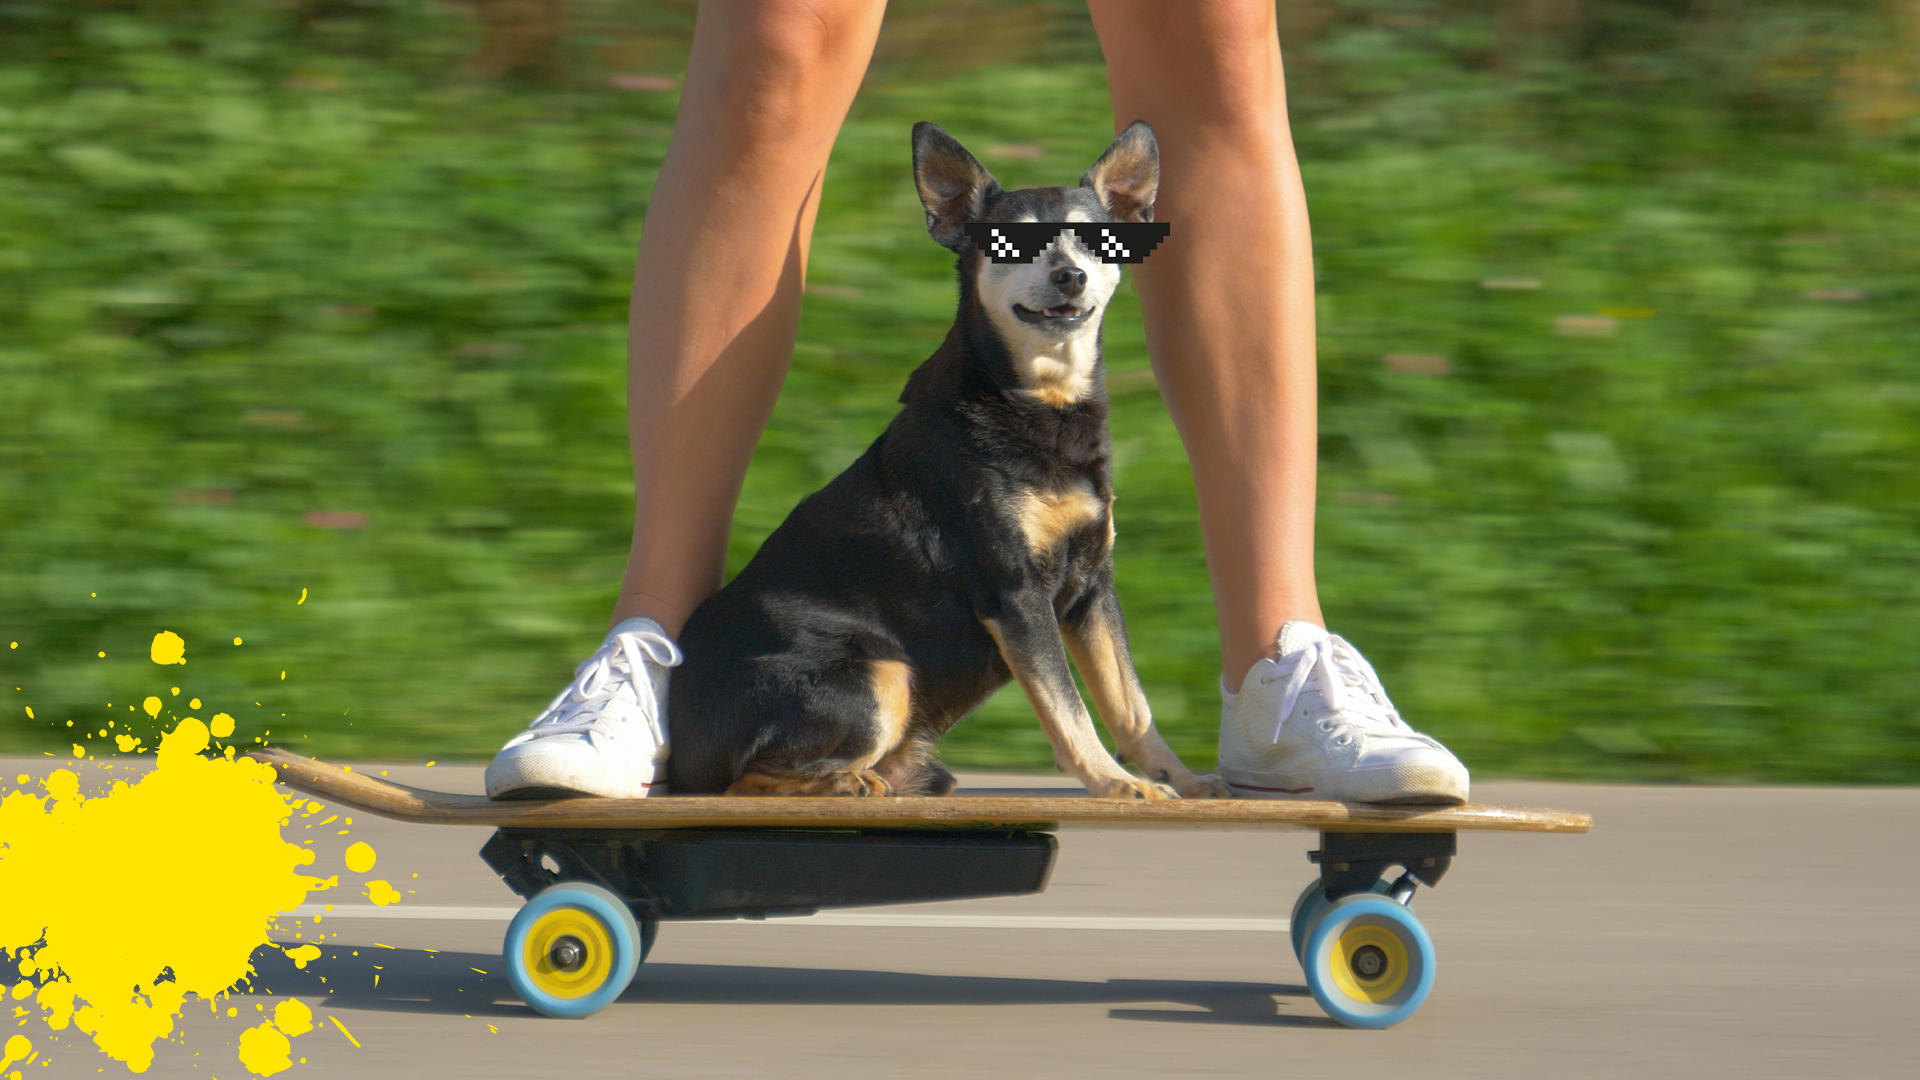 Man and dog on skateboard with sunglasses and yellow splat